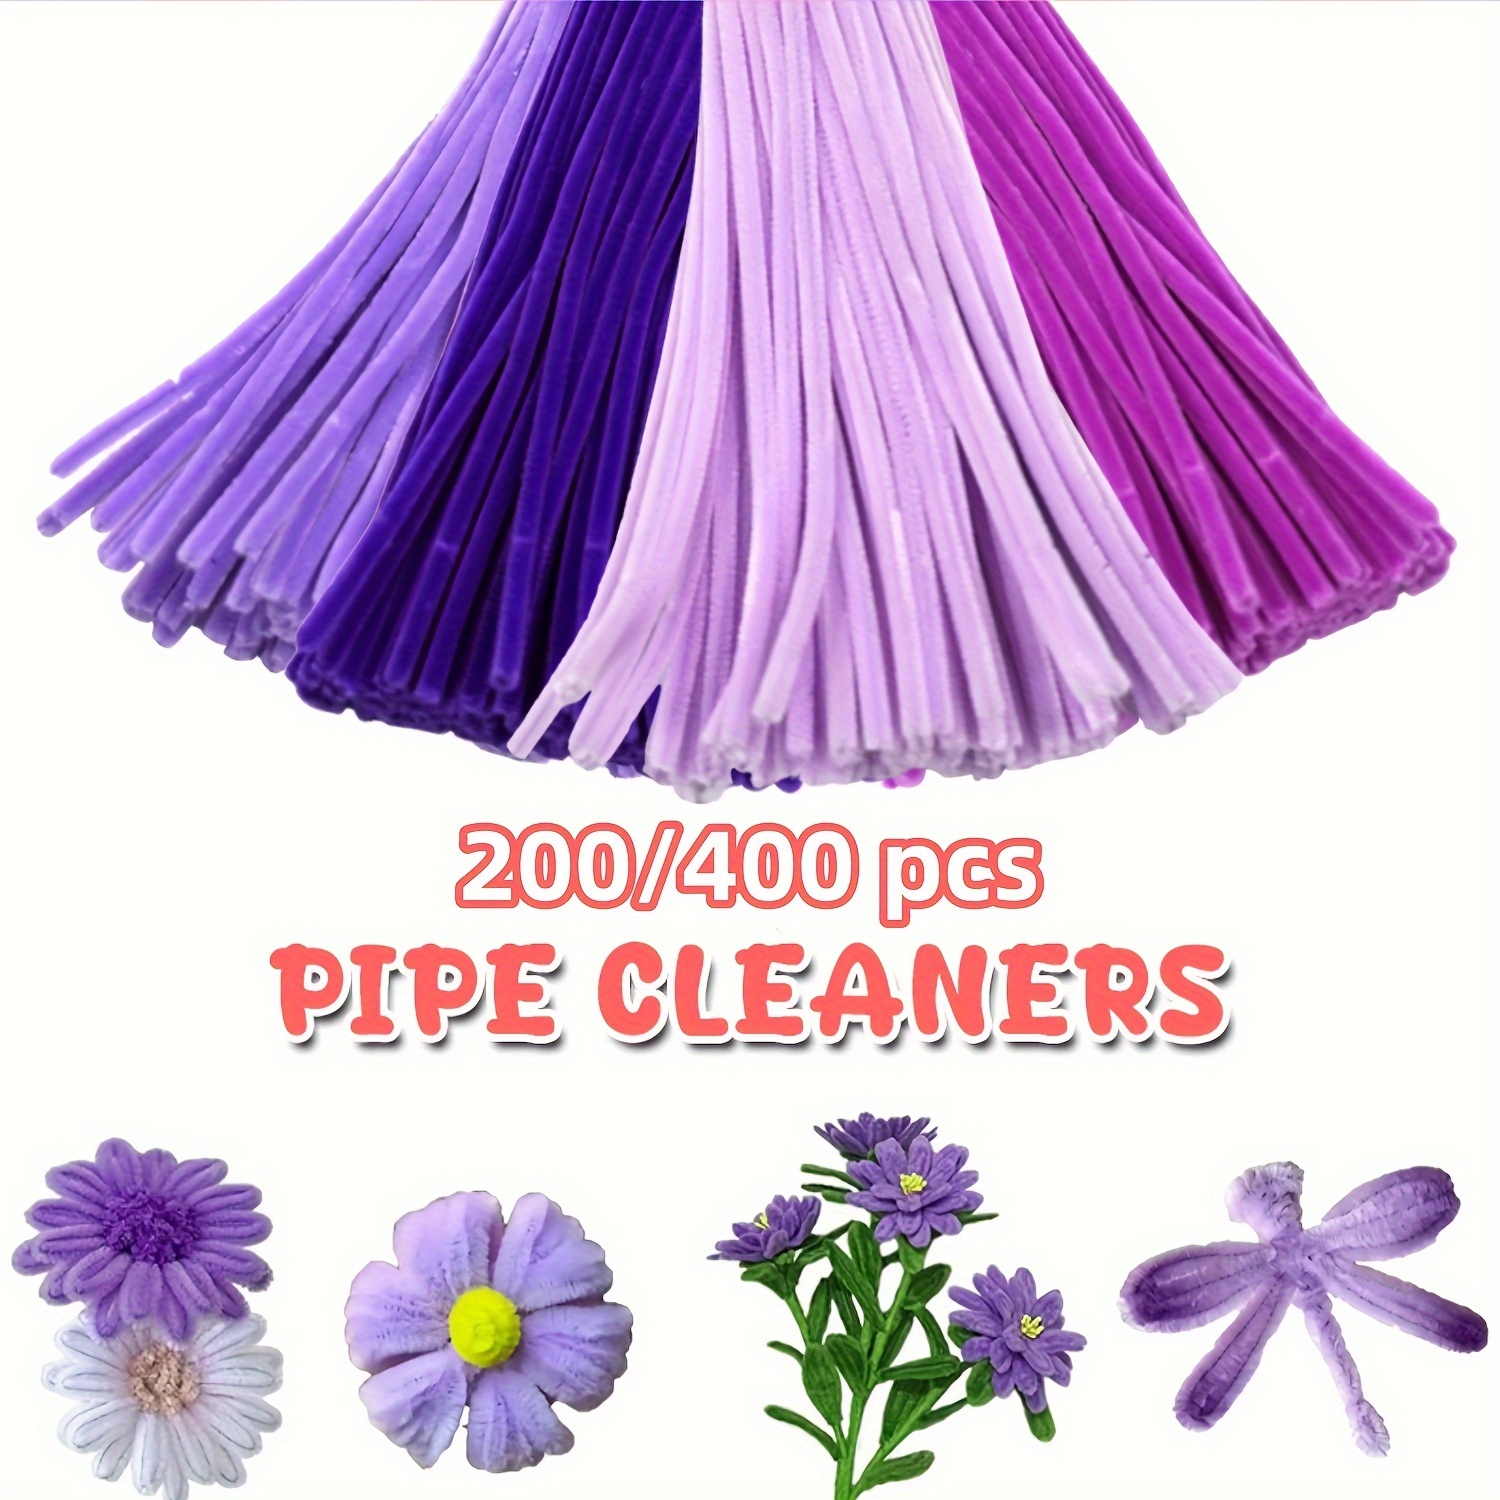 

Assorted Purple & Green Pipe Cleaners - 200/400 Count, Flexible Chenille Stems For Diy Crafts, Art Projects & Holiday Decorations